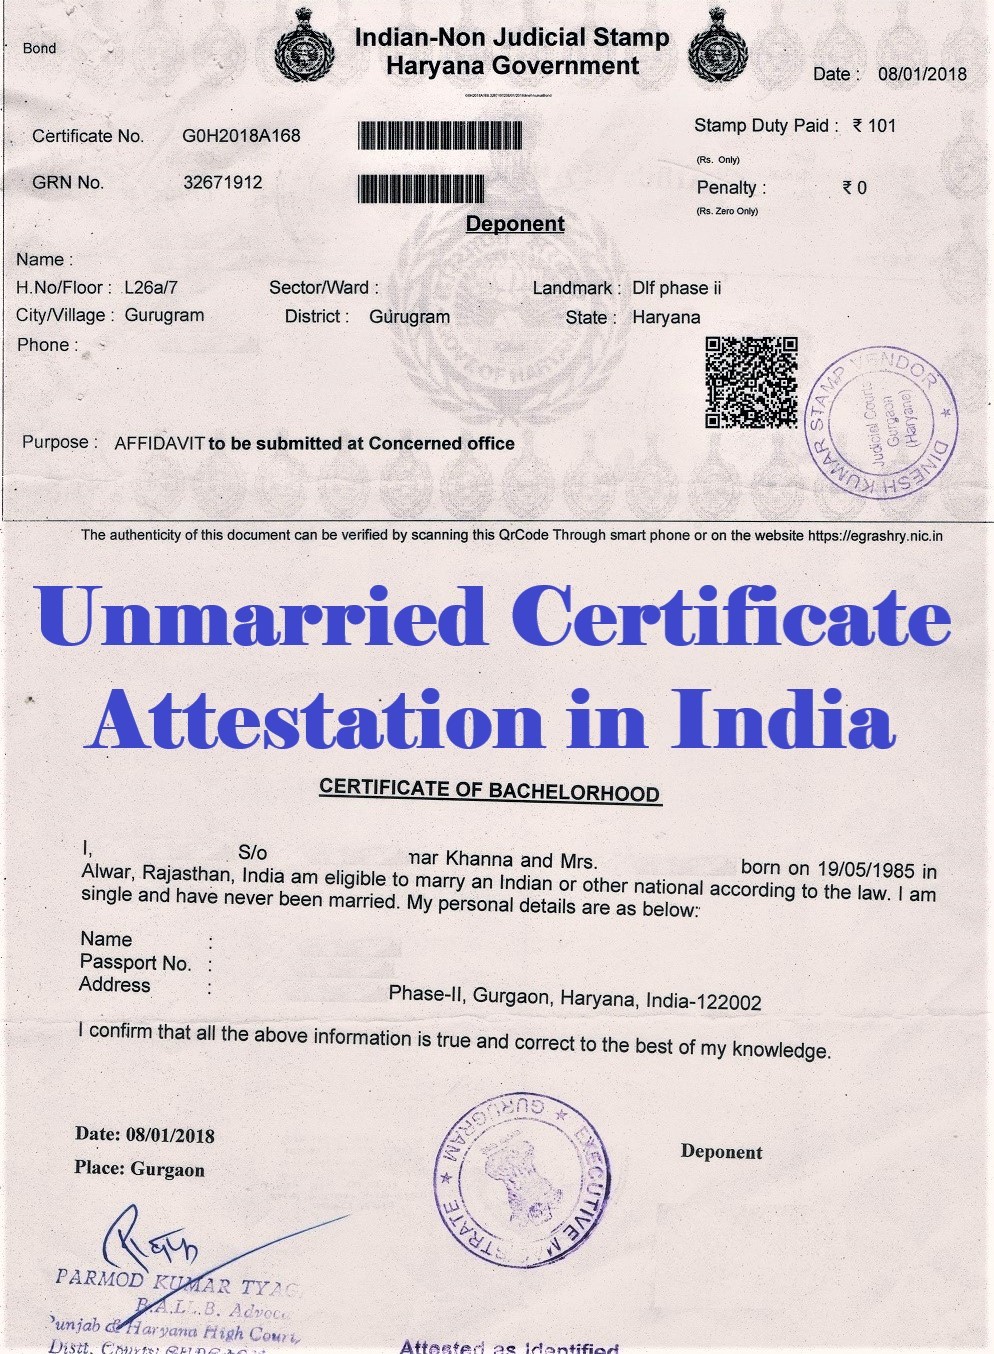 Unmarried Certificate Attestation from San Marino Embassy